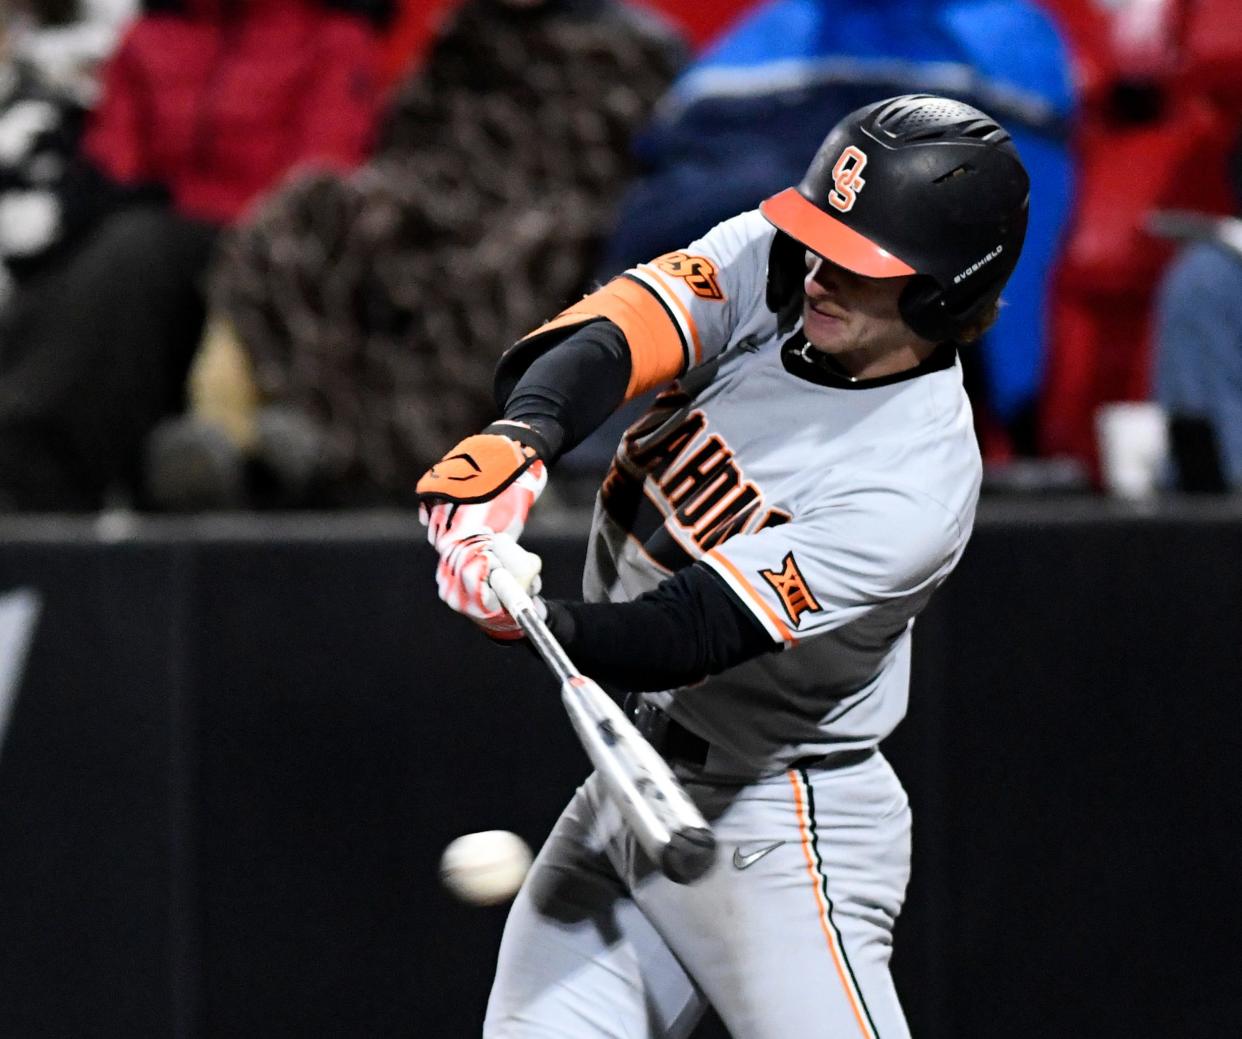 Oklahoma State outfielder Carson Benge takes swing during a March 2023 game against Texas Tech in Lubbock. Benge and the Cowboys host the Red Raiders in a three-game series that starts Friday in Stillwater, Oklahoma.